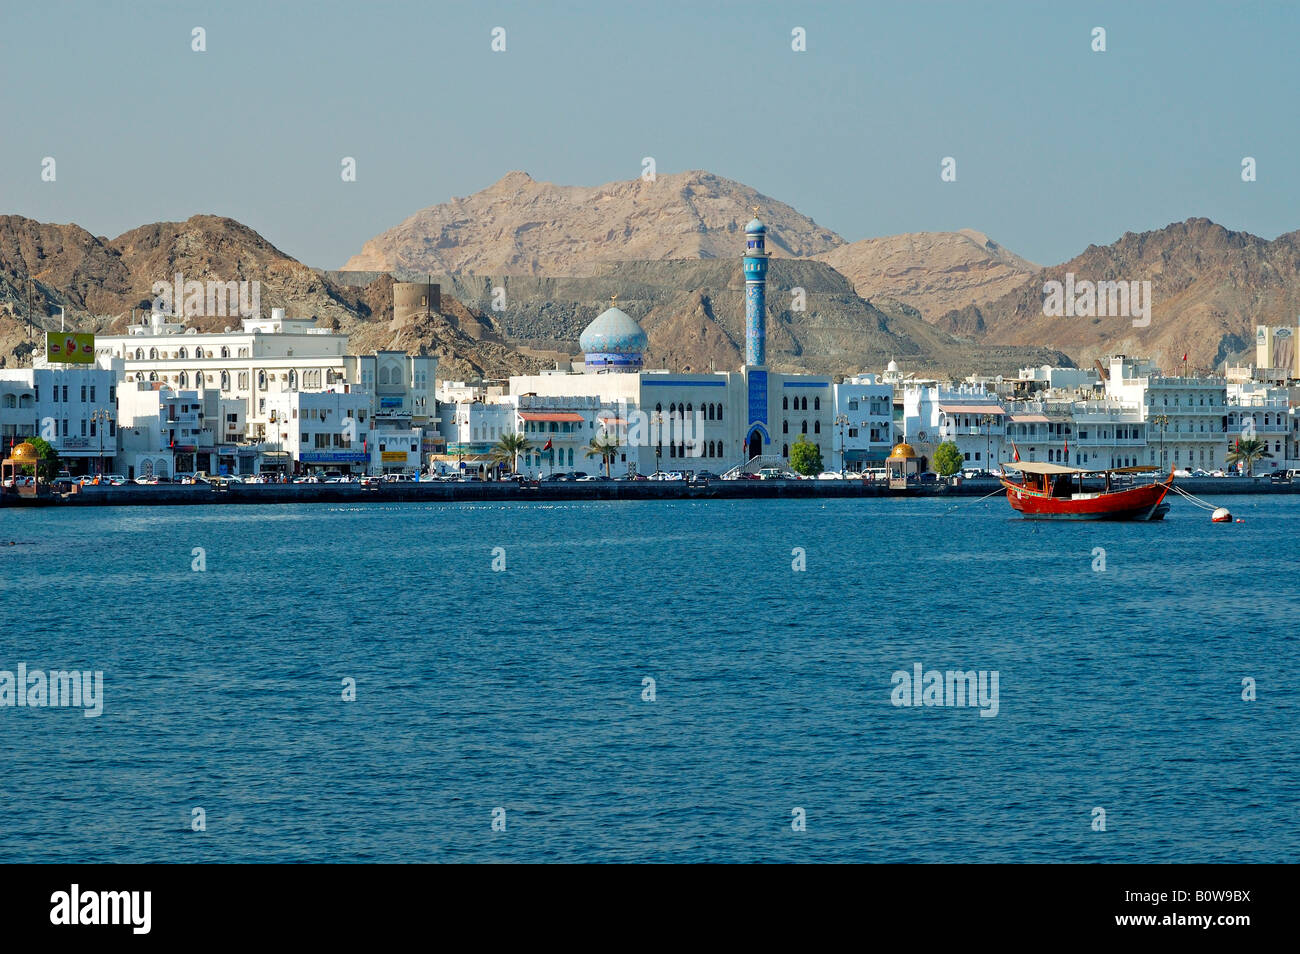 View of the Muttrah quarter of Muscat, Oman, Middle East Stock Photo